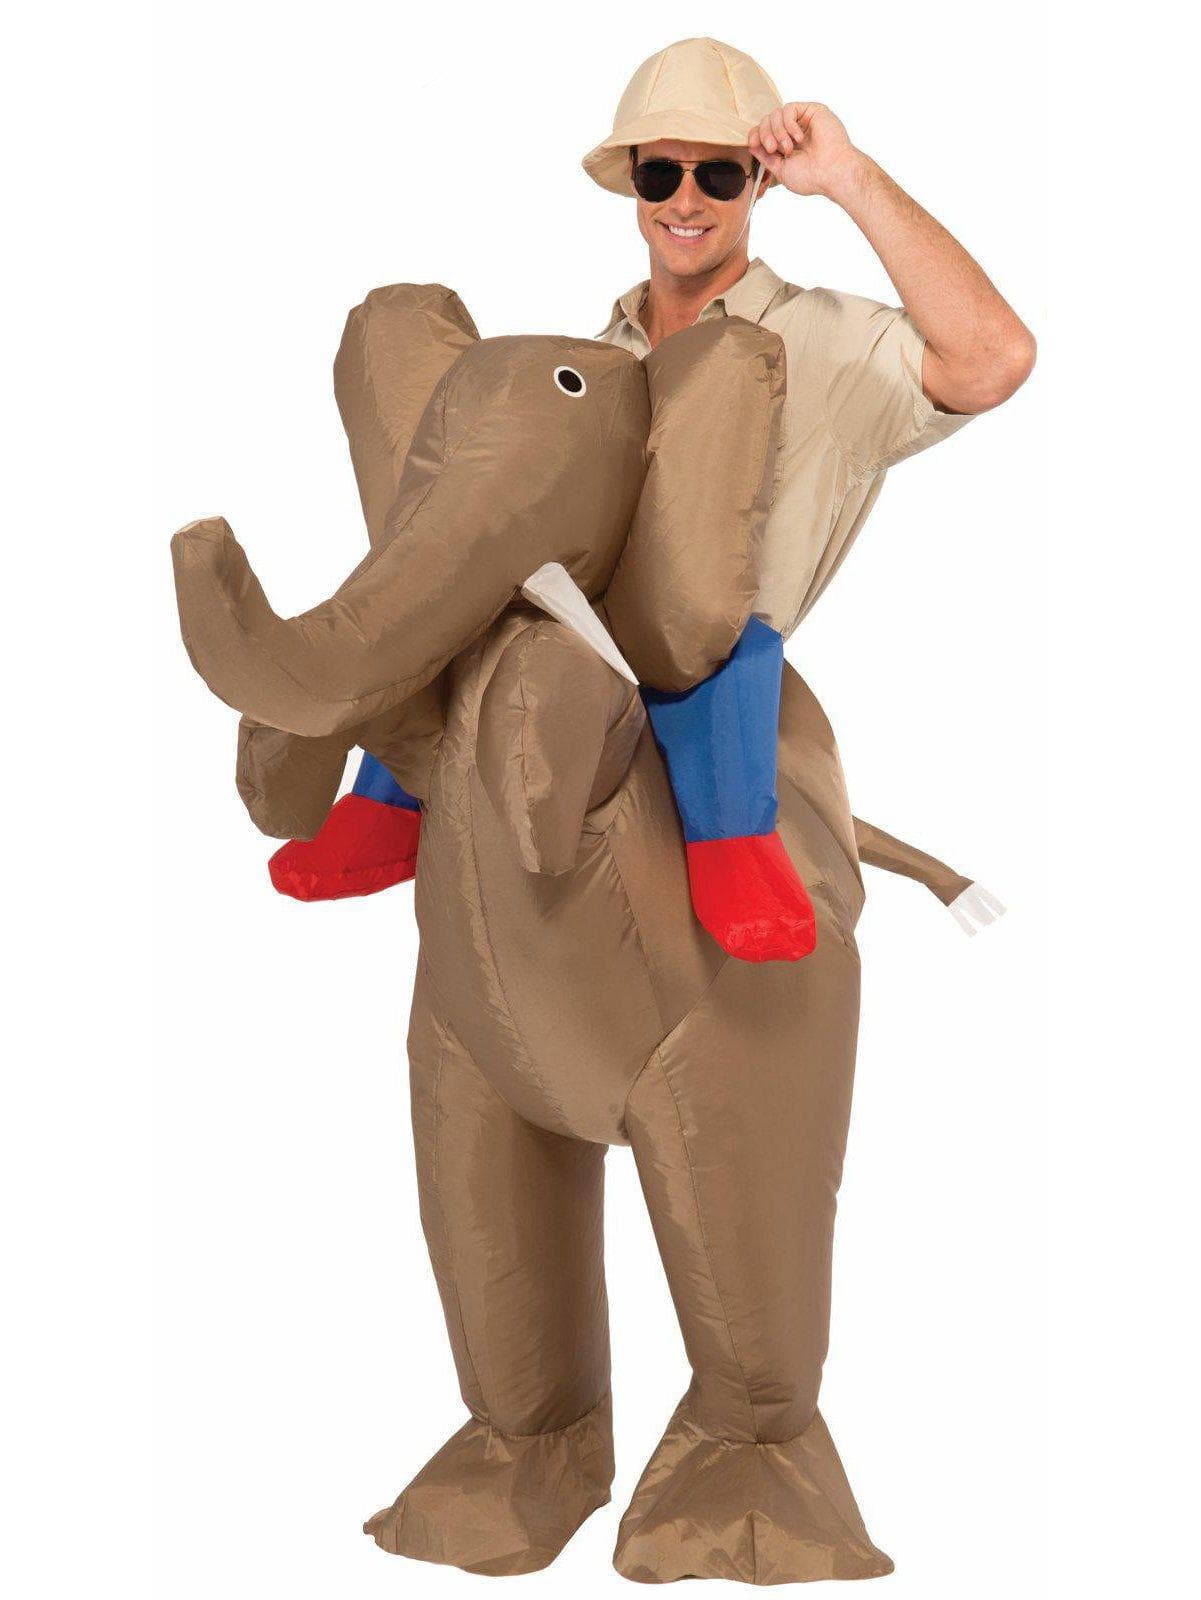 Adult Ride In Elephant Inflatable Costume - costumes.com